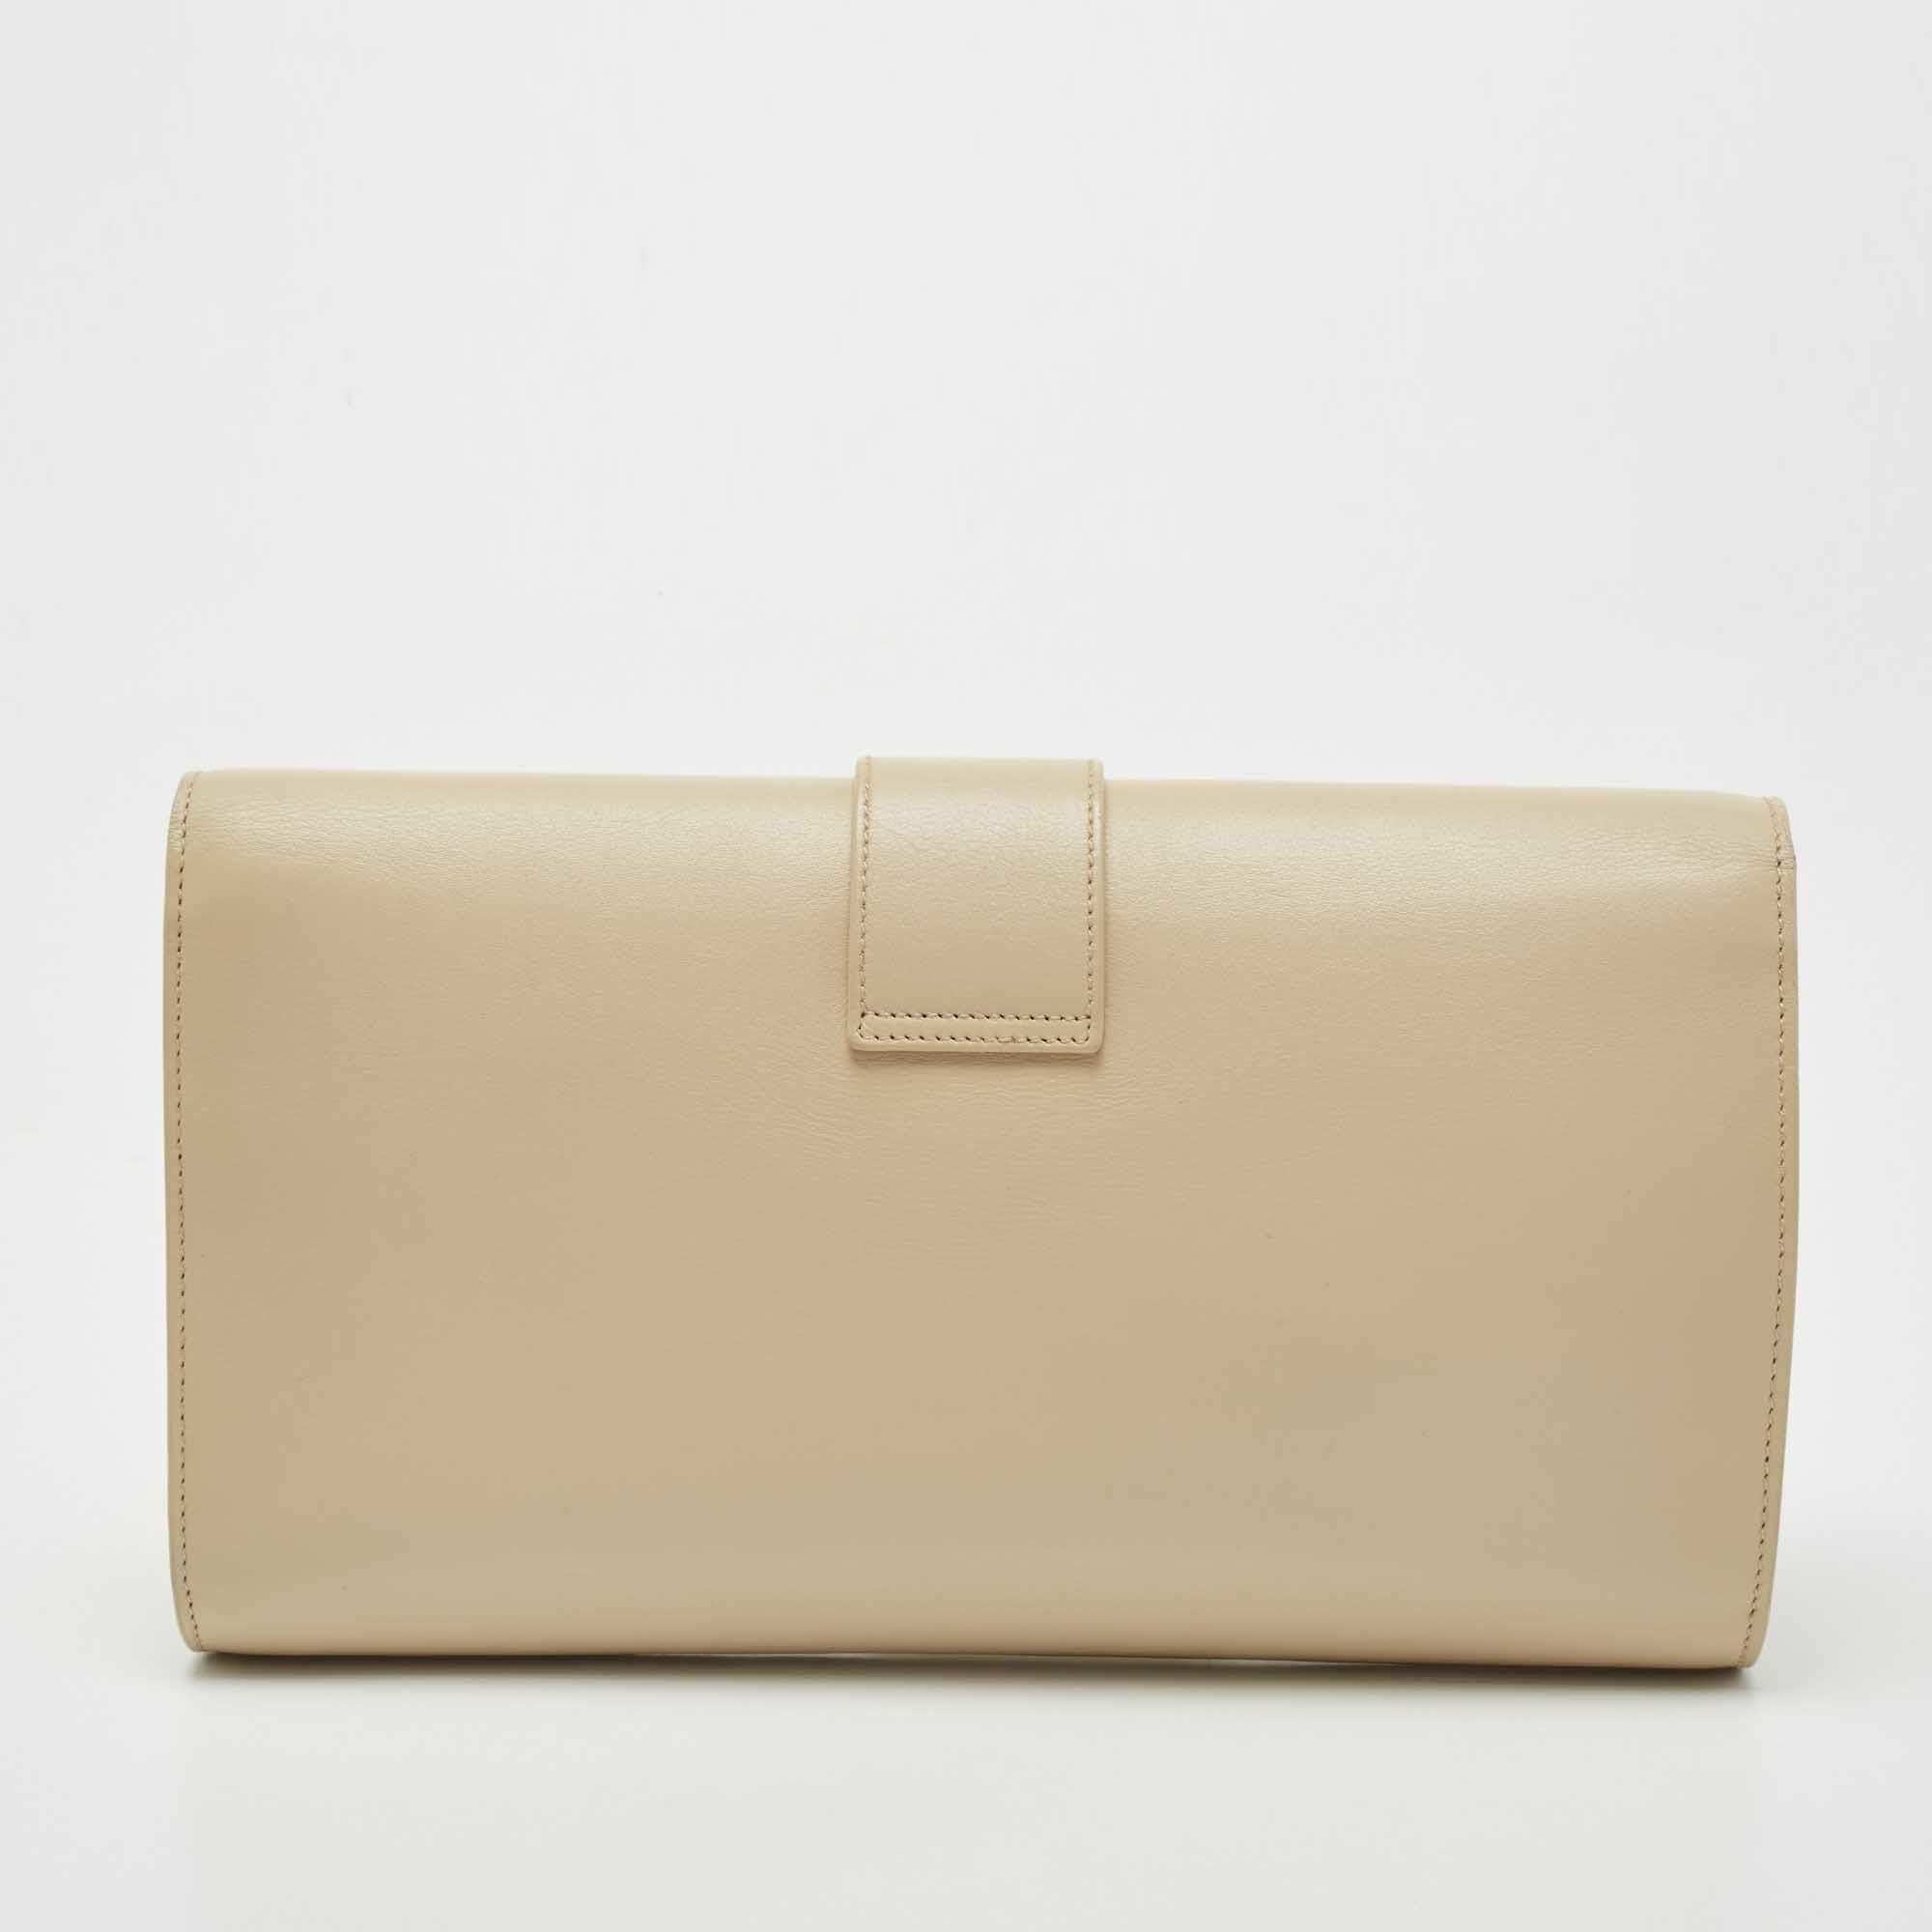 This Saint Laurent clutch has a refined and simple display. Created from beige leather, it exhibits a Y-motif in gold tone on the front flap, and its suede-lined interior will keep your evening essentials safe.

Includes: Original Dustbag
